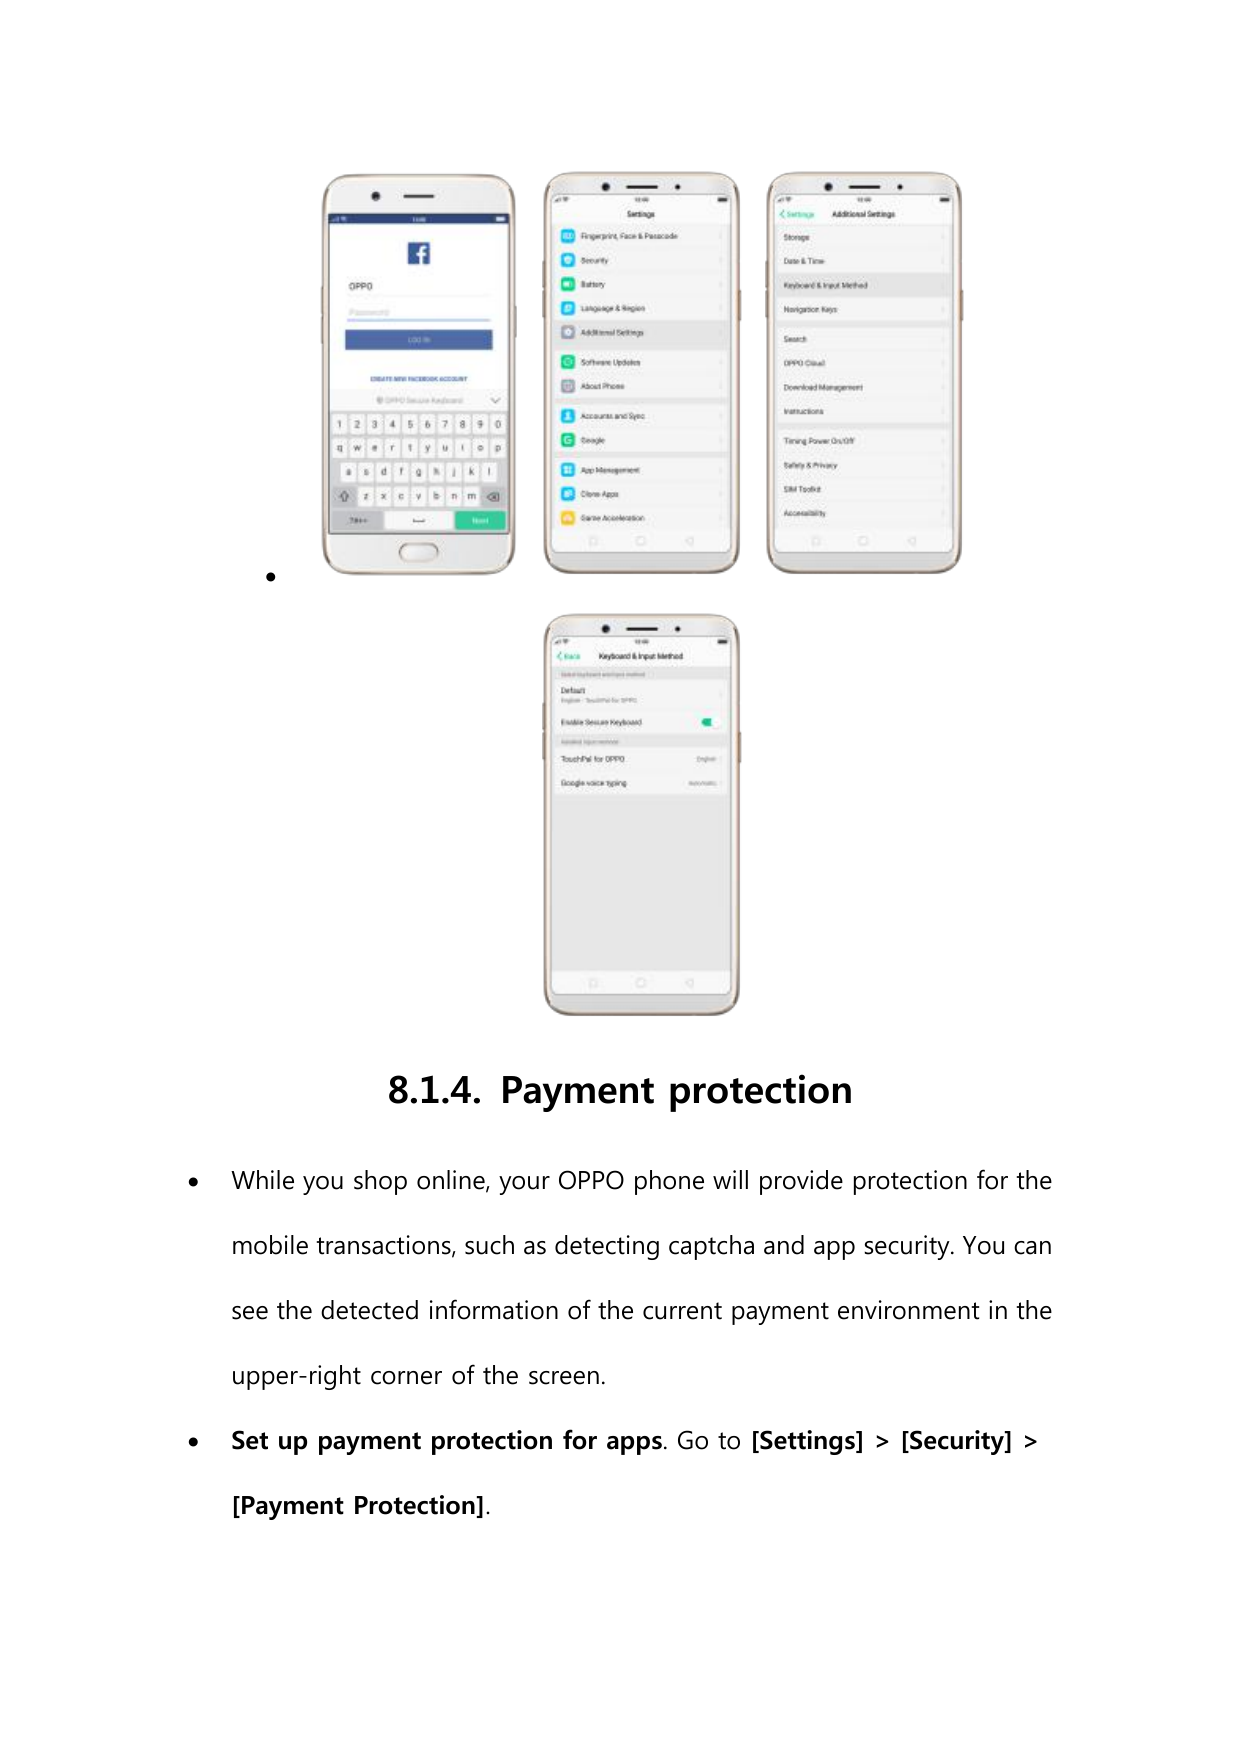 8.1.4. Payment protectionWhile you shop online, your OPPO phone will provide protection for themobile transactions, such as de